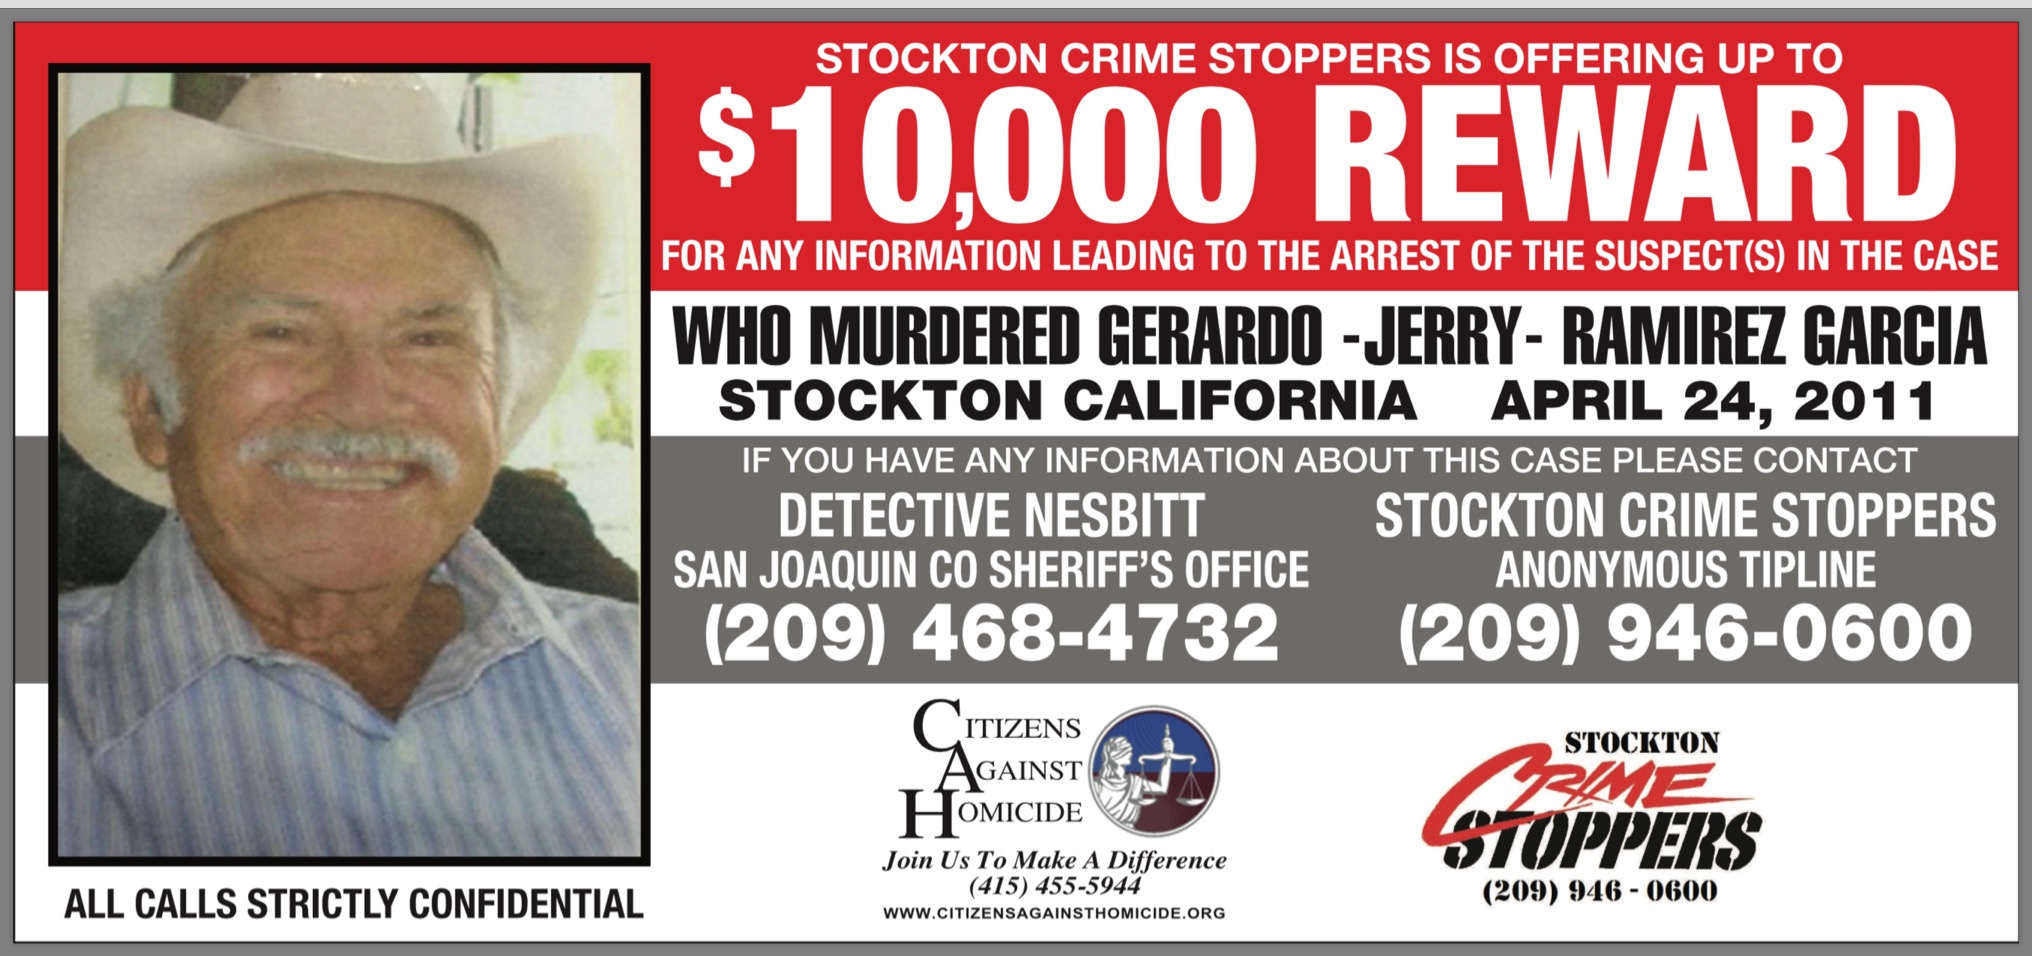 Up to $10,000 Reward for information leading to an arrest and conviction for the murder of Gerardo Jerry Ramirez Garcia